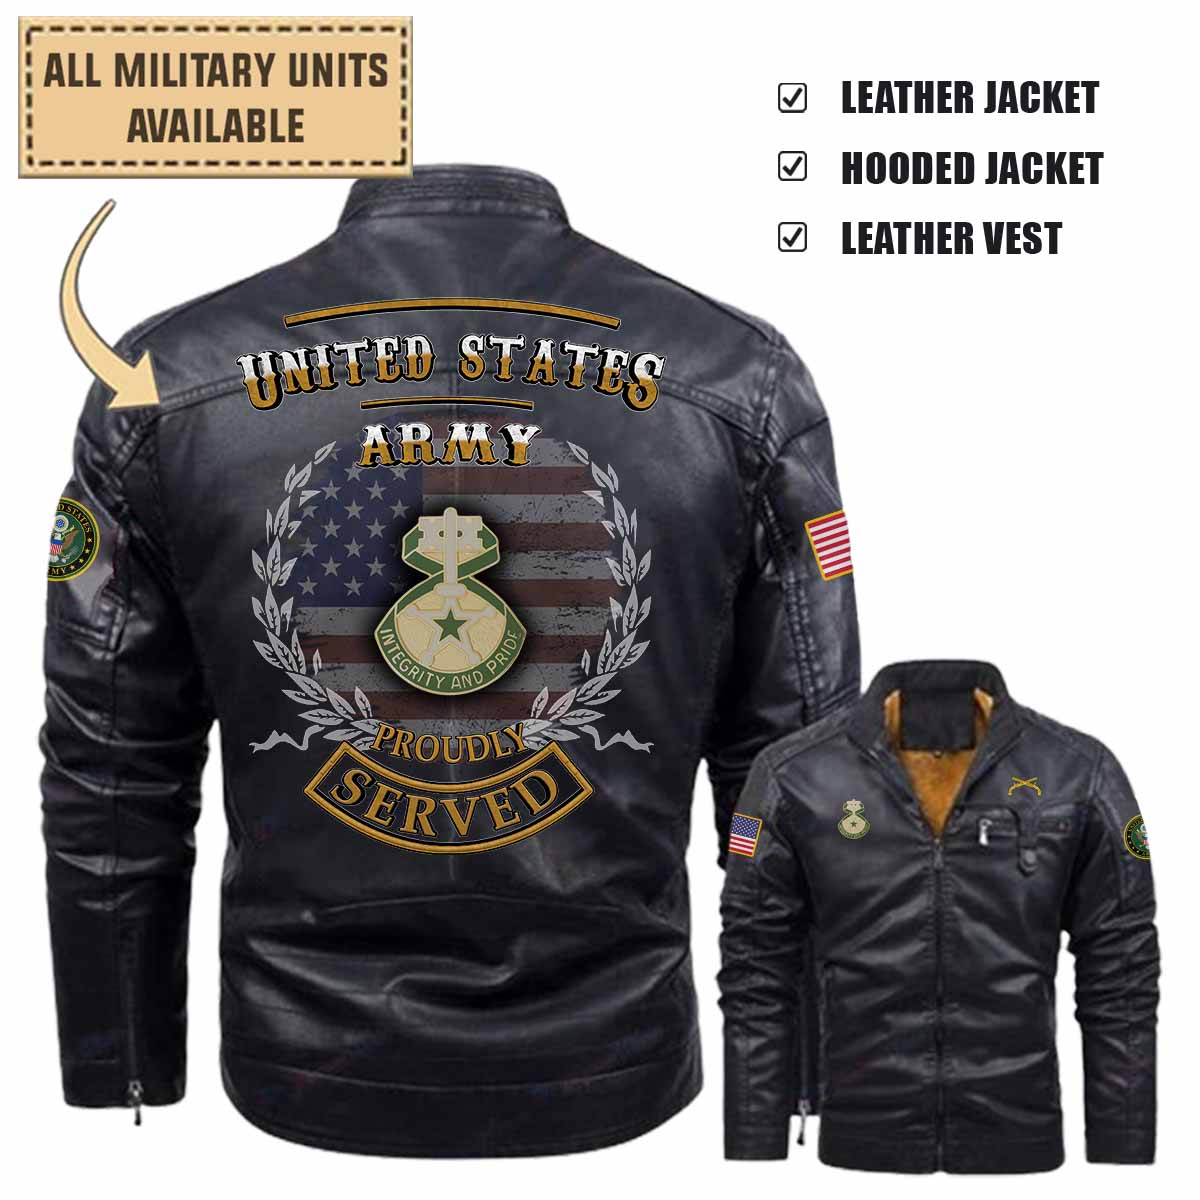 607th mp bn 607th military police battalionleather jacket and vest ntvfd